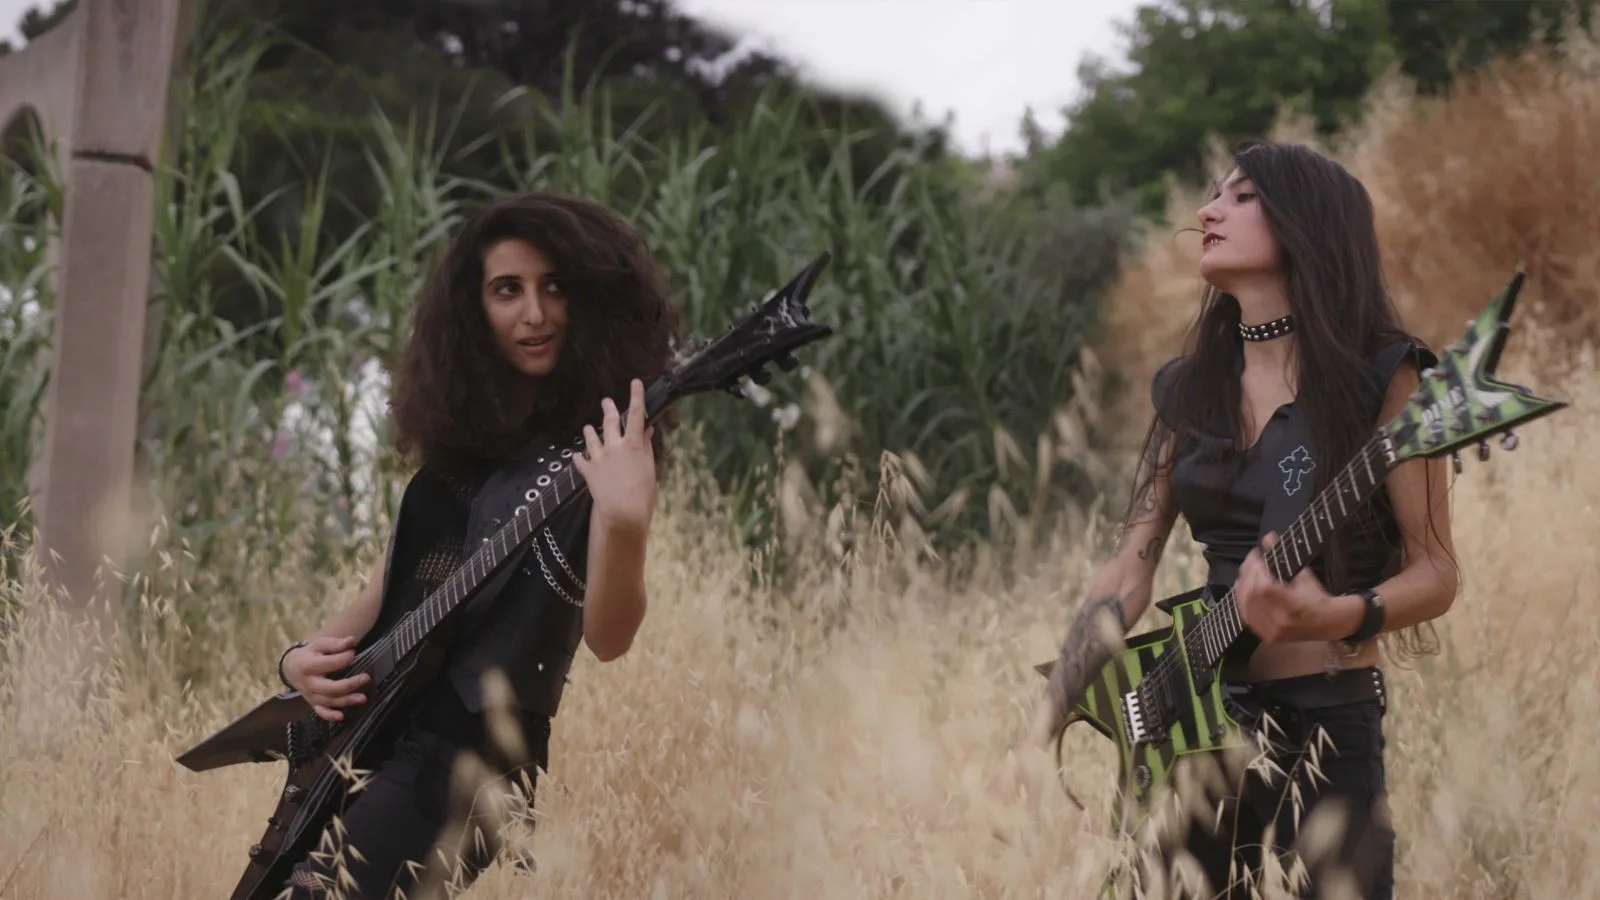 Lilas and Shery from the band, Slave to Sirens, play electric guitars in a field of wheat